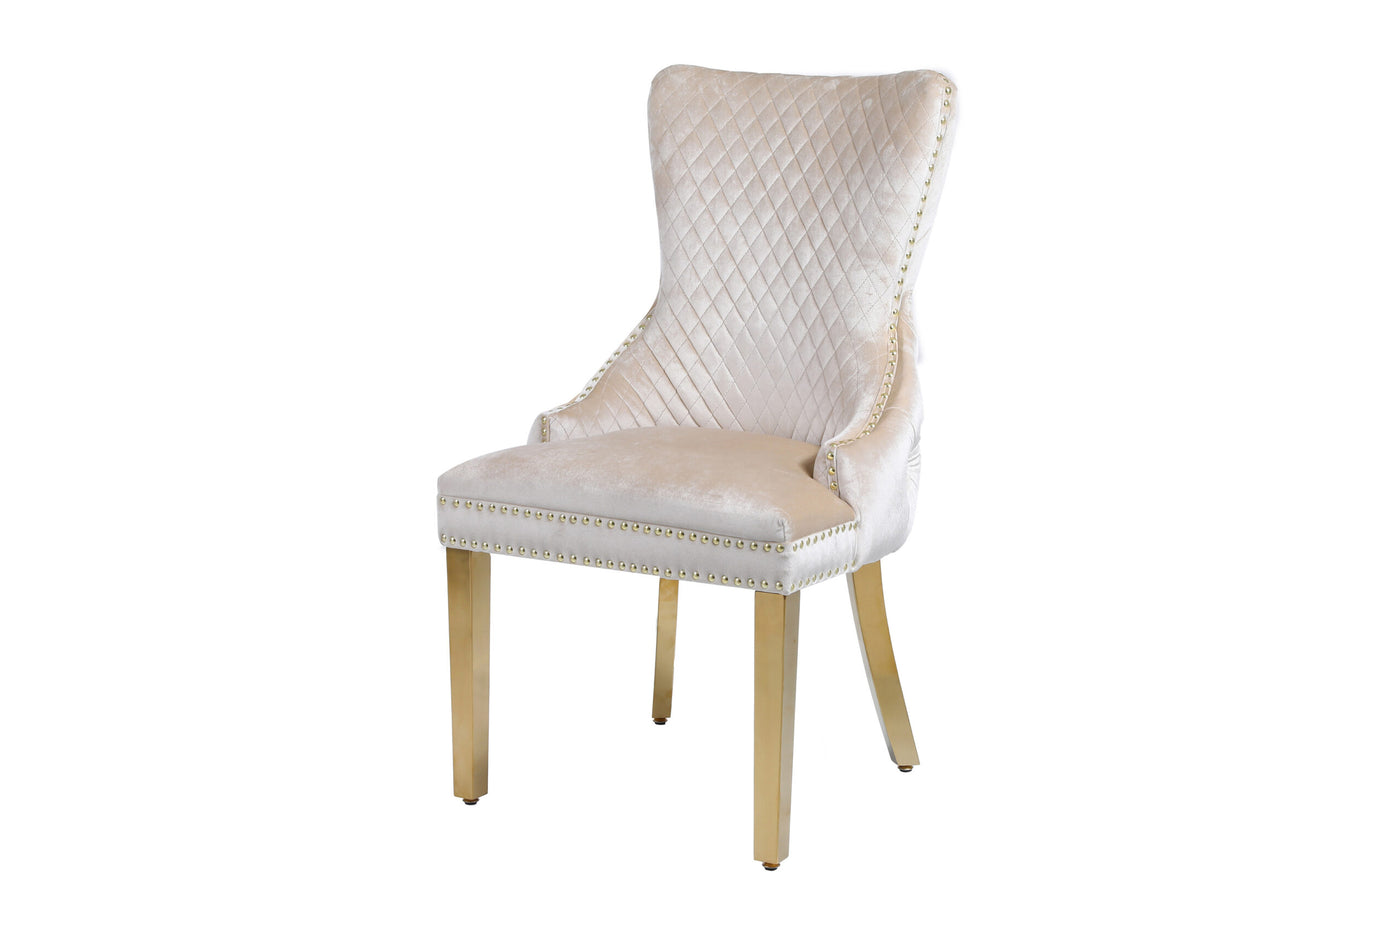 Louis Gold Round Cream Marble 110cm Dining Table + Cream Gold Lion Knocker Velvet Dining Chairs